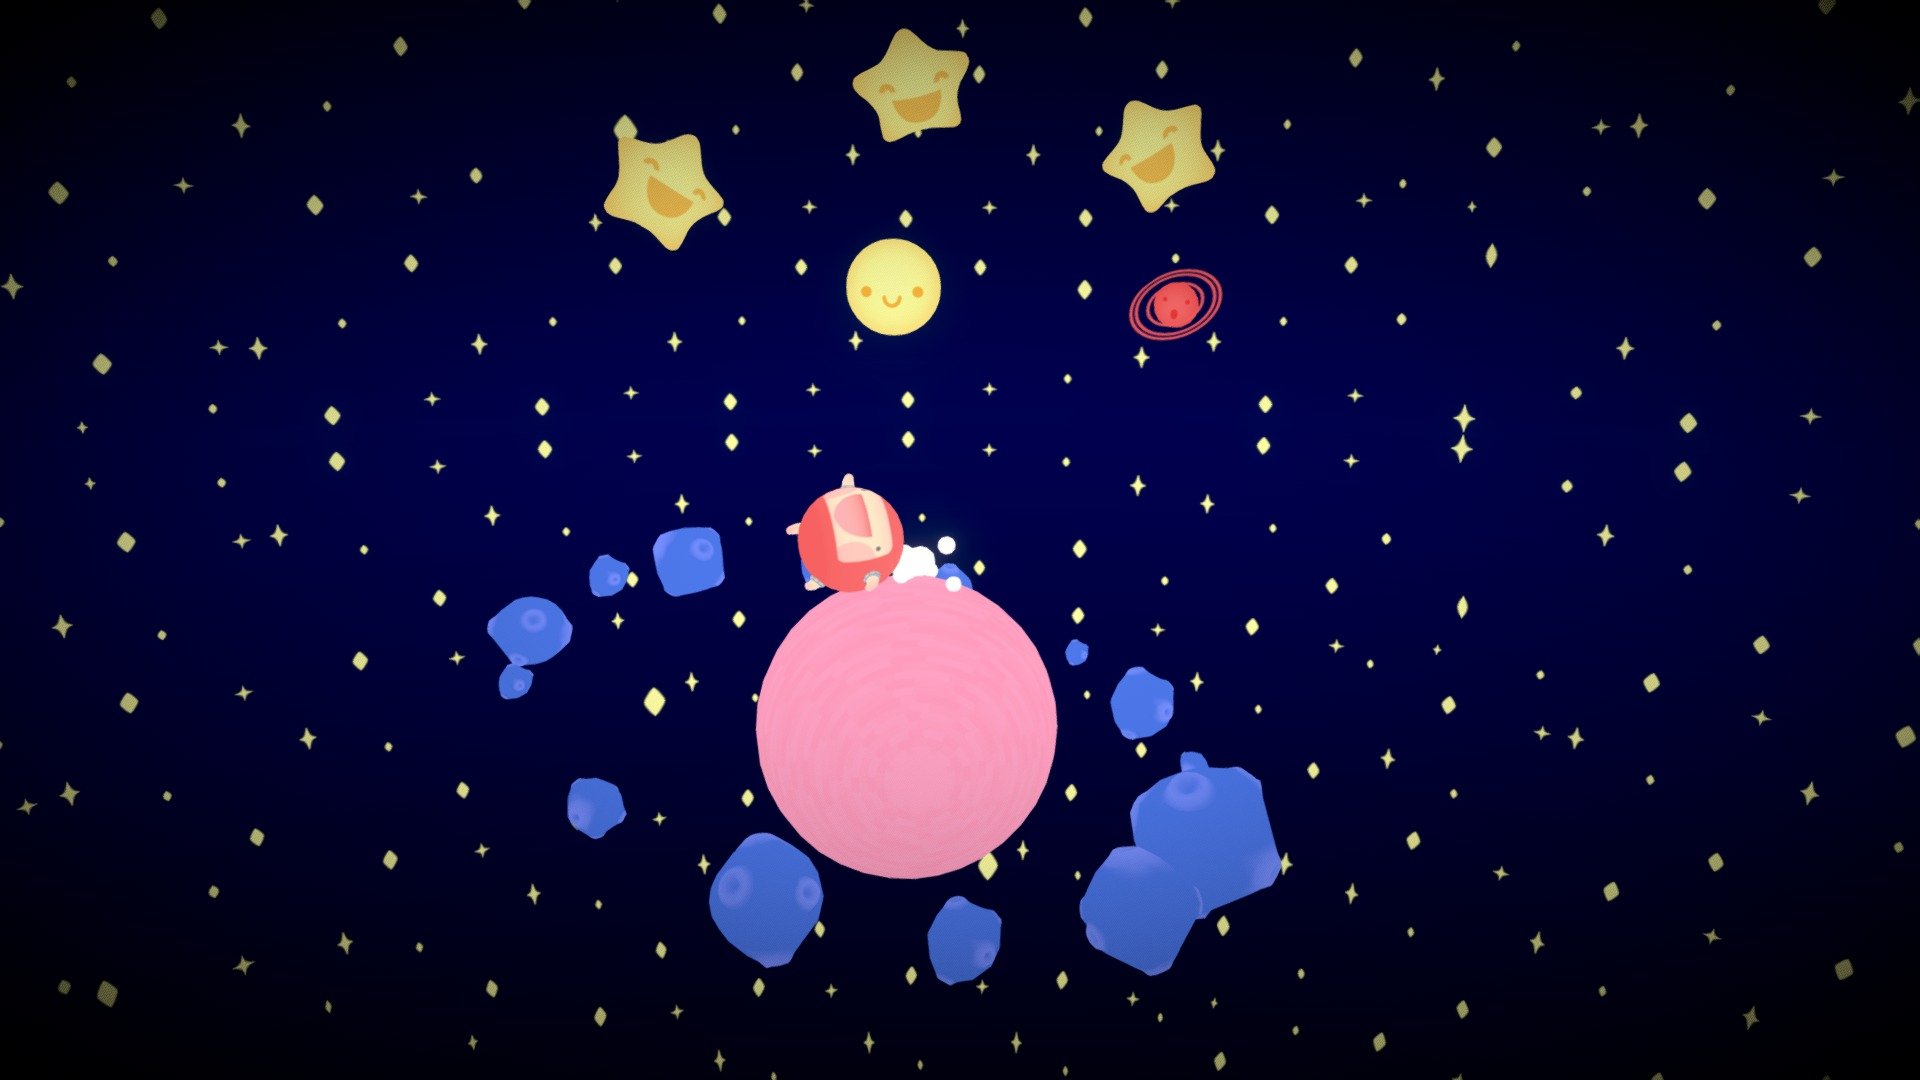 Here are some assets I made in a week for a game called Cutienaut. It's about a little round astronaut rolling on a planet to collect stars, asteroids, etc 3d model